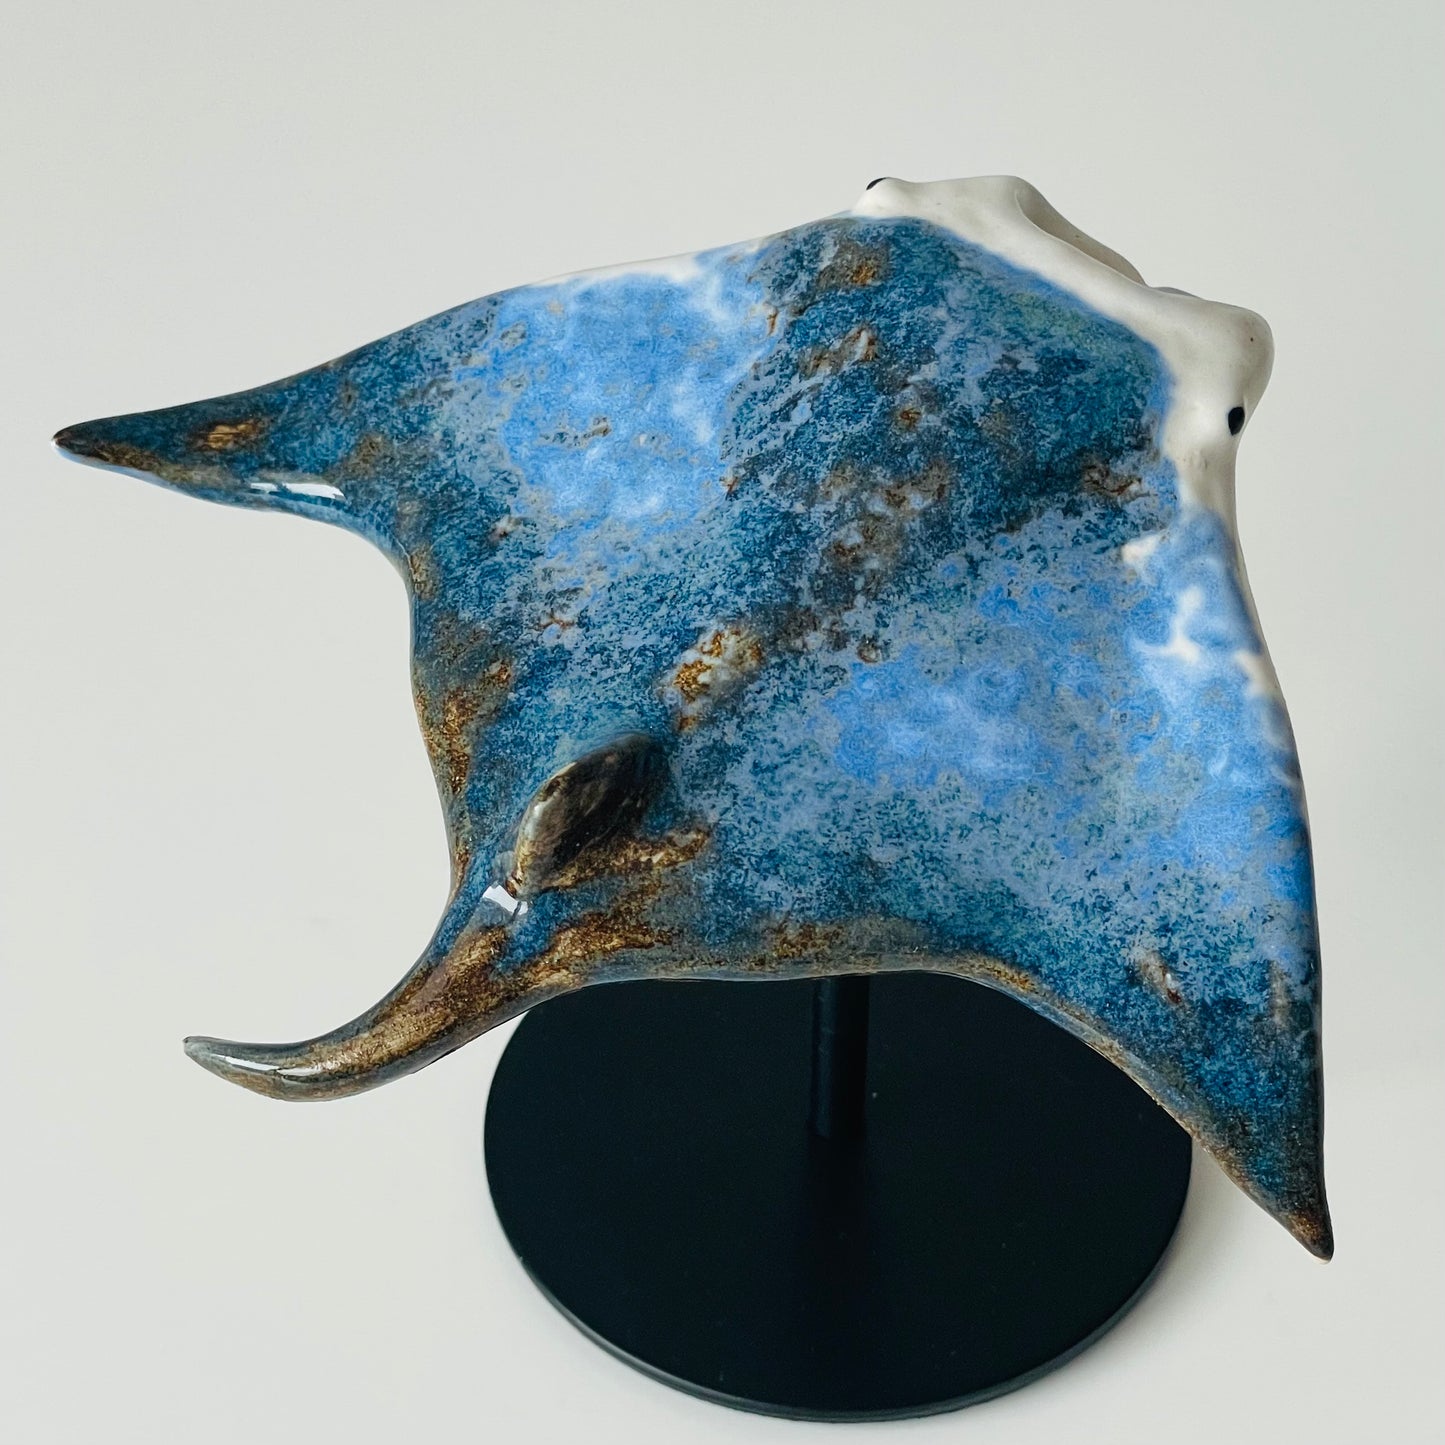 Manta Ray on a metal stand